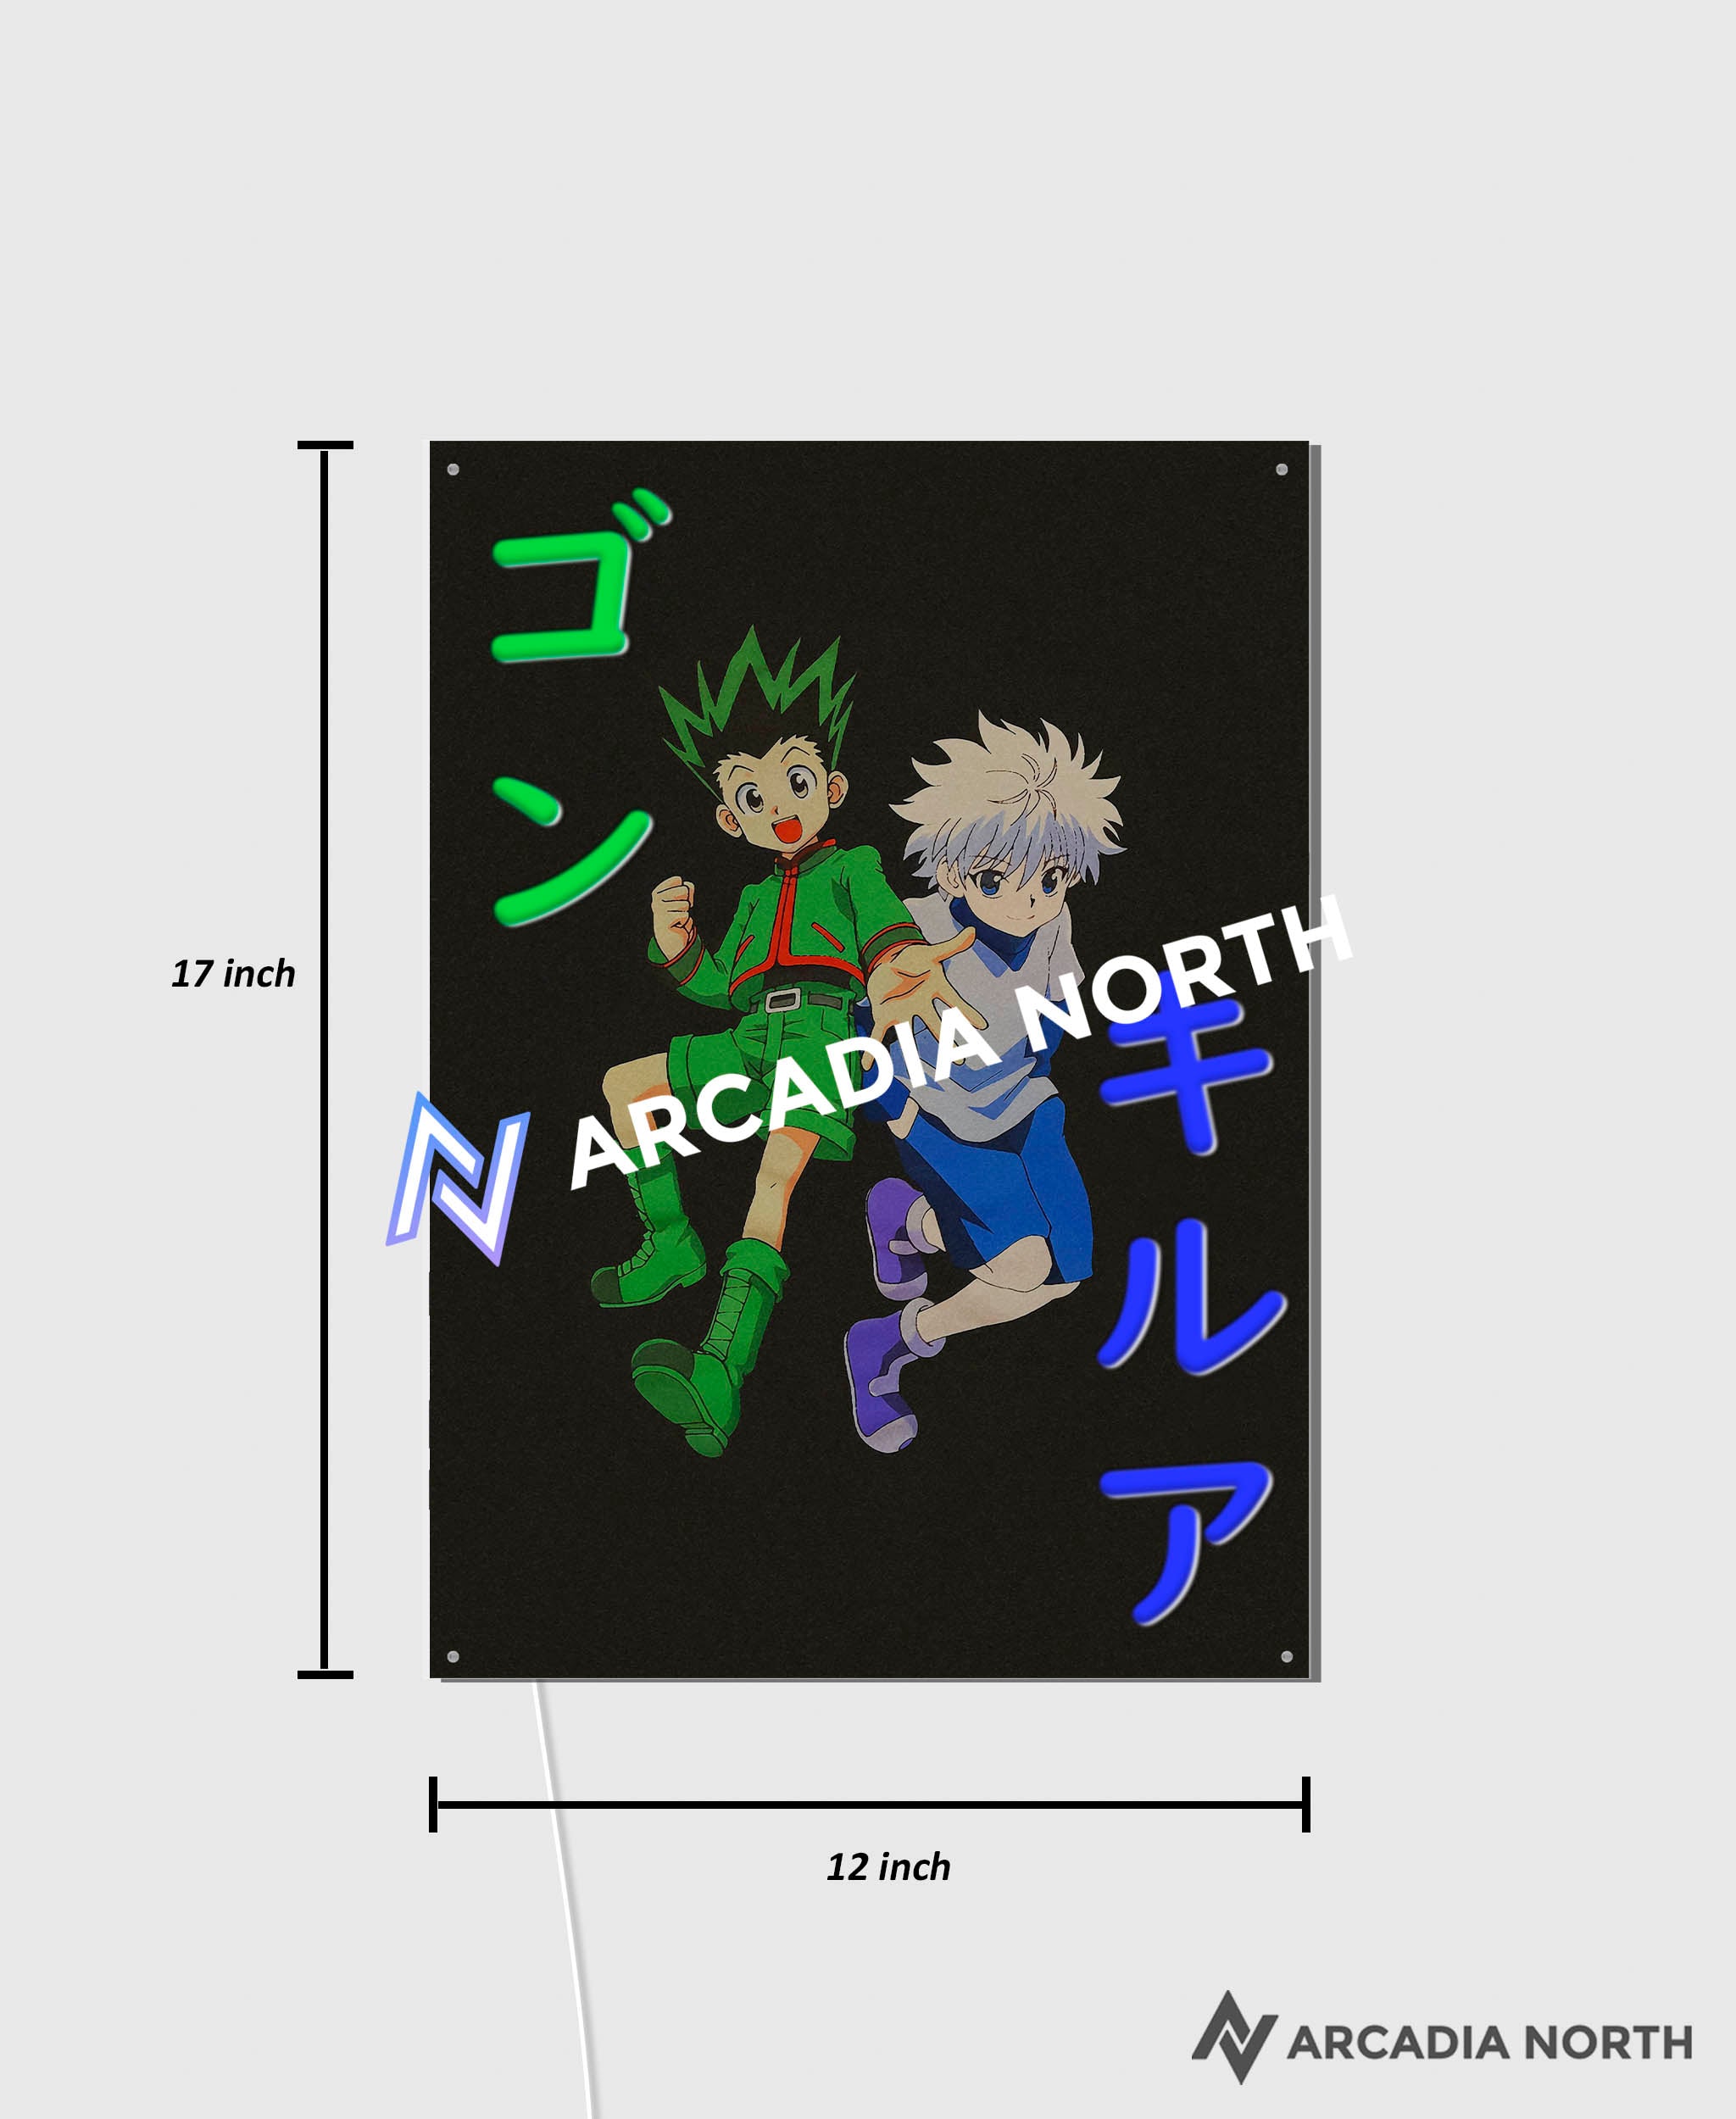 Arcadia North AURALIGHT Original LED Poster featuring the anime Hunter x Hunter with Gon and Killua and their names written in Japanese Katakana [ゴン] and [キルア]. The names are illuminated by glowing LED neon lights that match each character’s main color. UV-printed poster on acrylic.